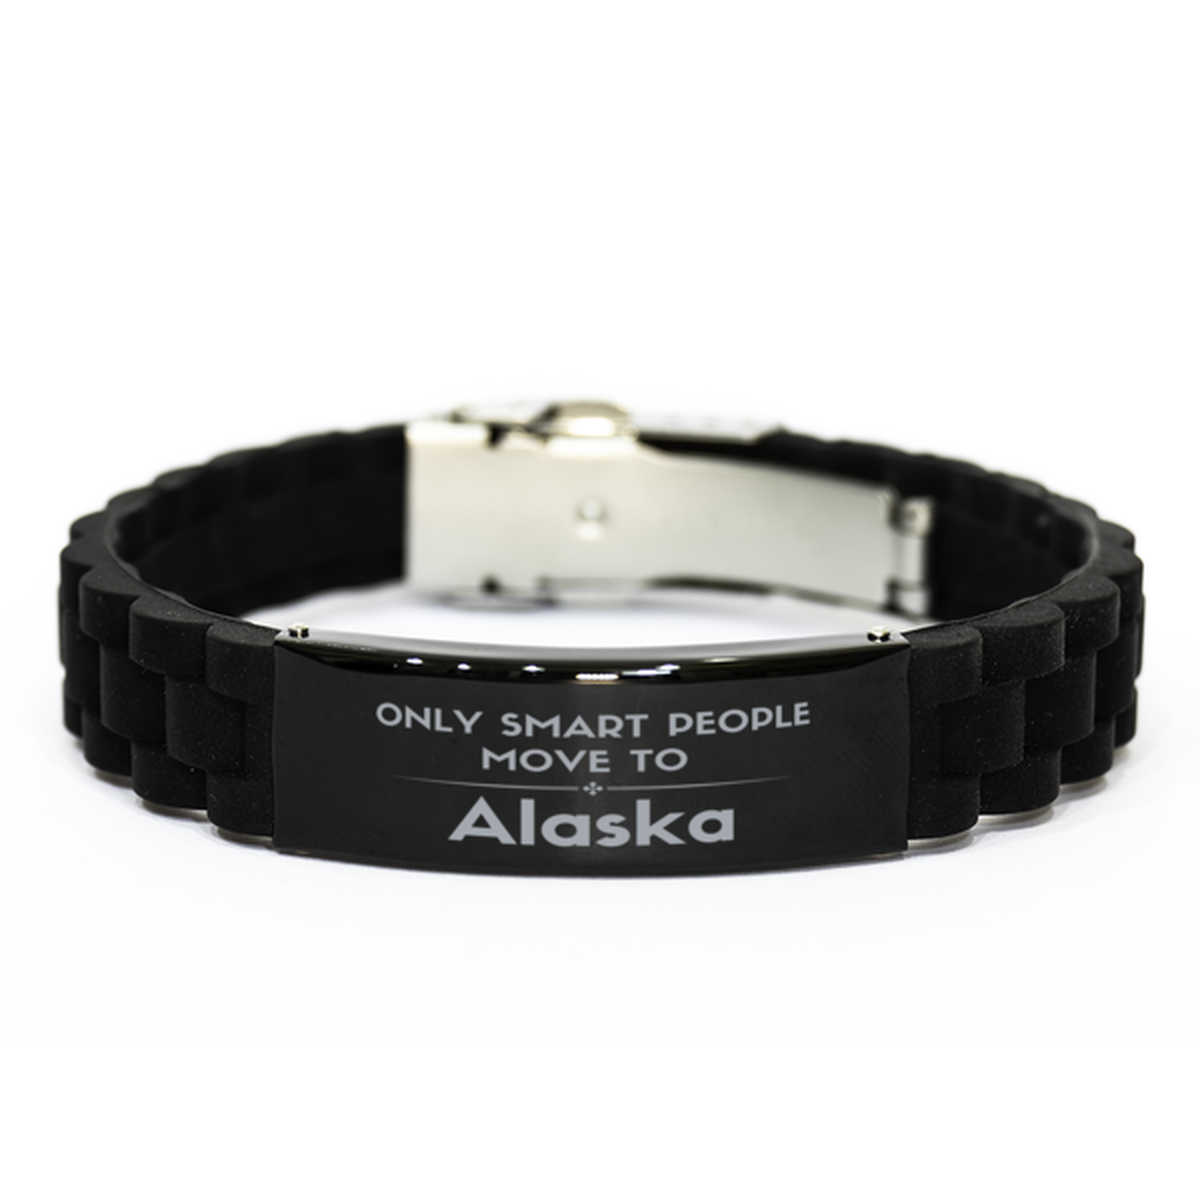 Only smart people move to Alaska Black Glidelock Clasp Bracelet, Gag Gifts For Alaska, Move to Alaska Gifts for Friends Coworker Funny Saying Quote